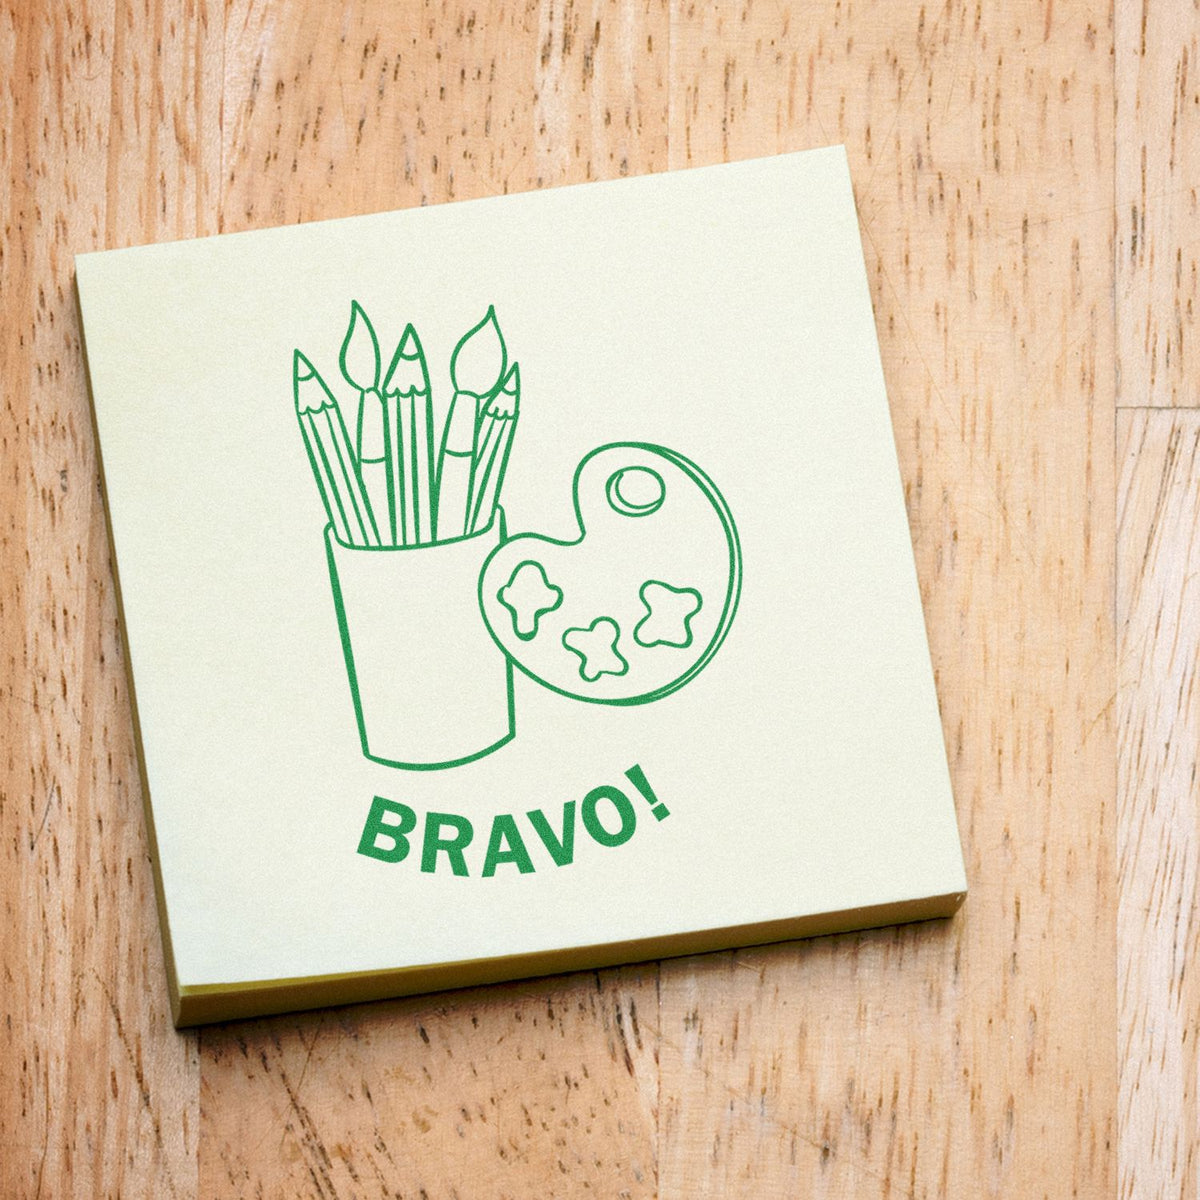 Round Bravo Rubber Stamp In Use